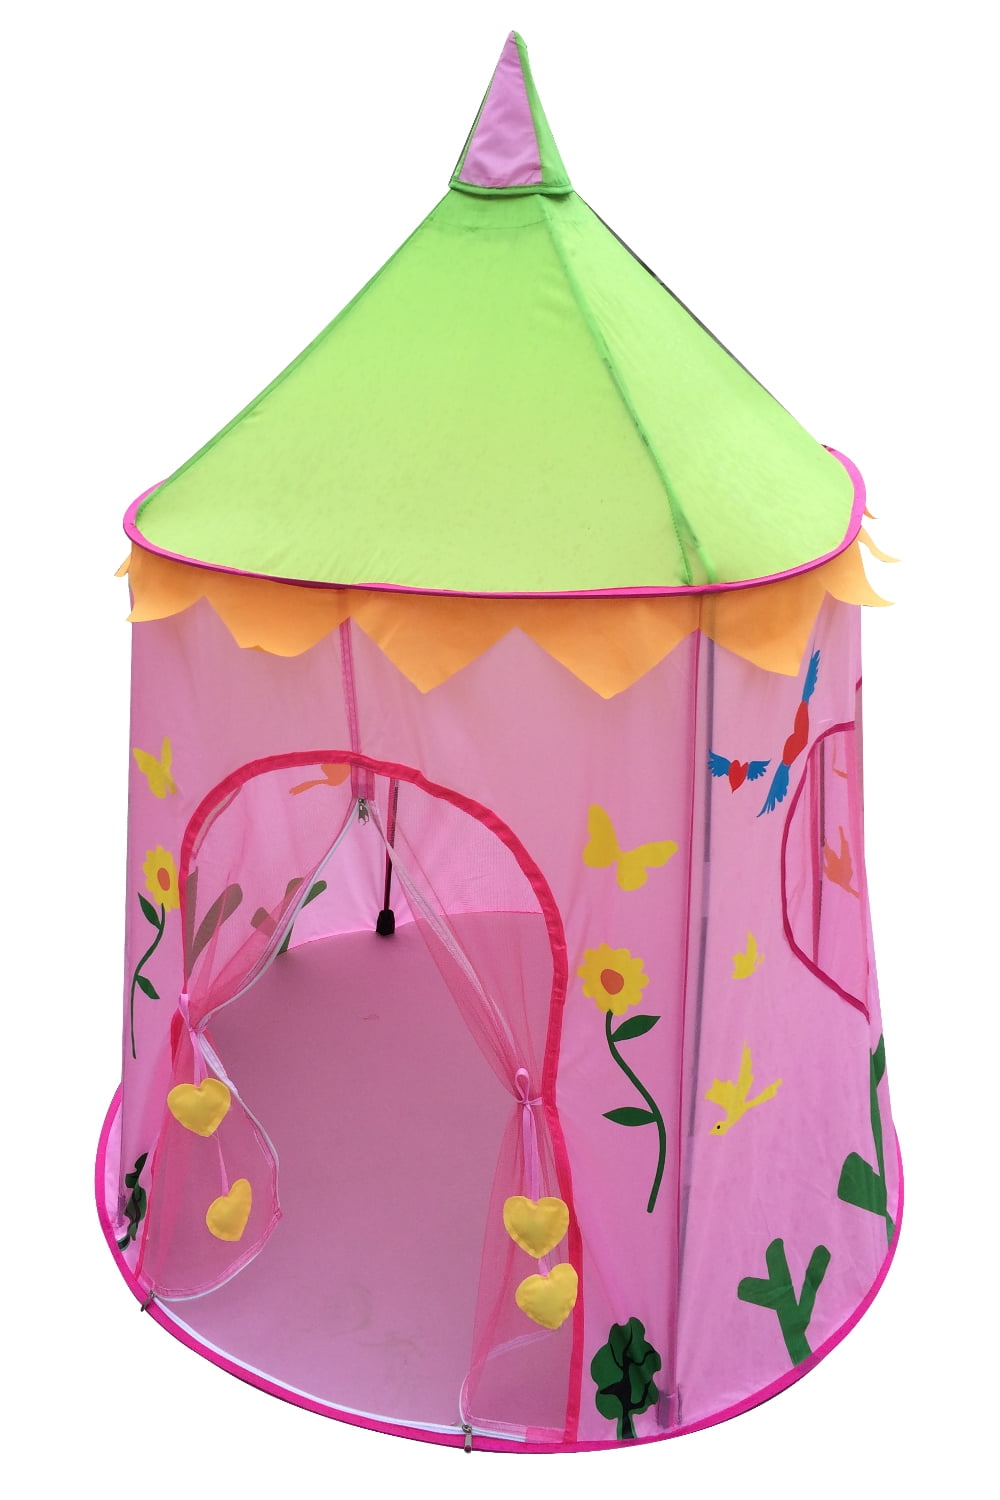 Details about   Wonderland Princess Castle Floral Fairy Palace Toy House Girls Pink Play Tent 